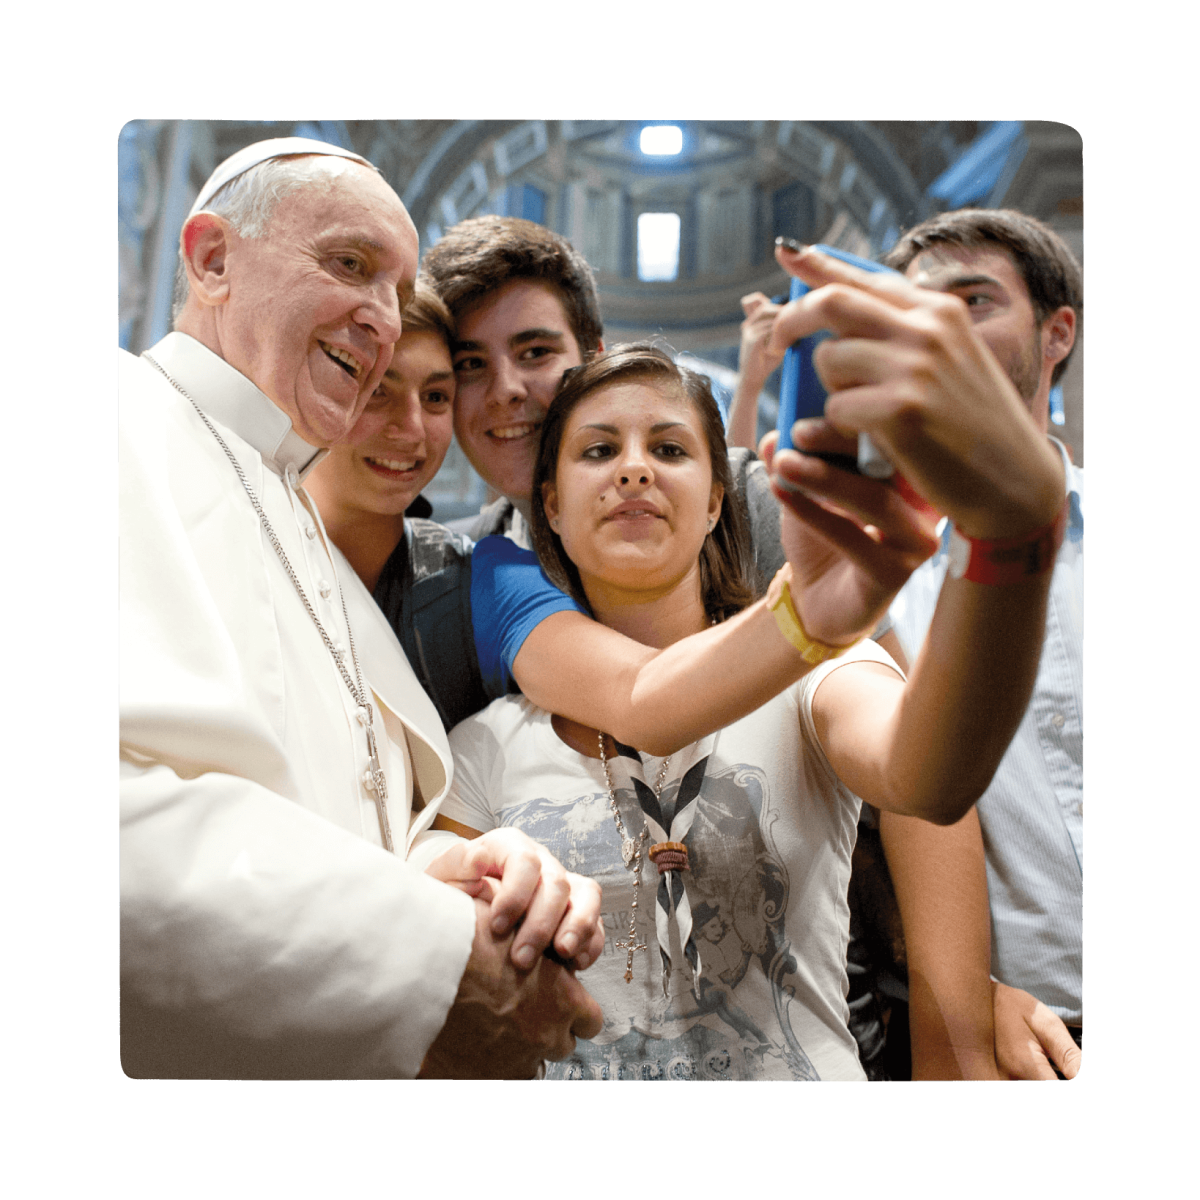 Pope with young catholics reading the docat app